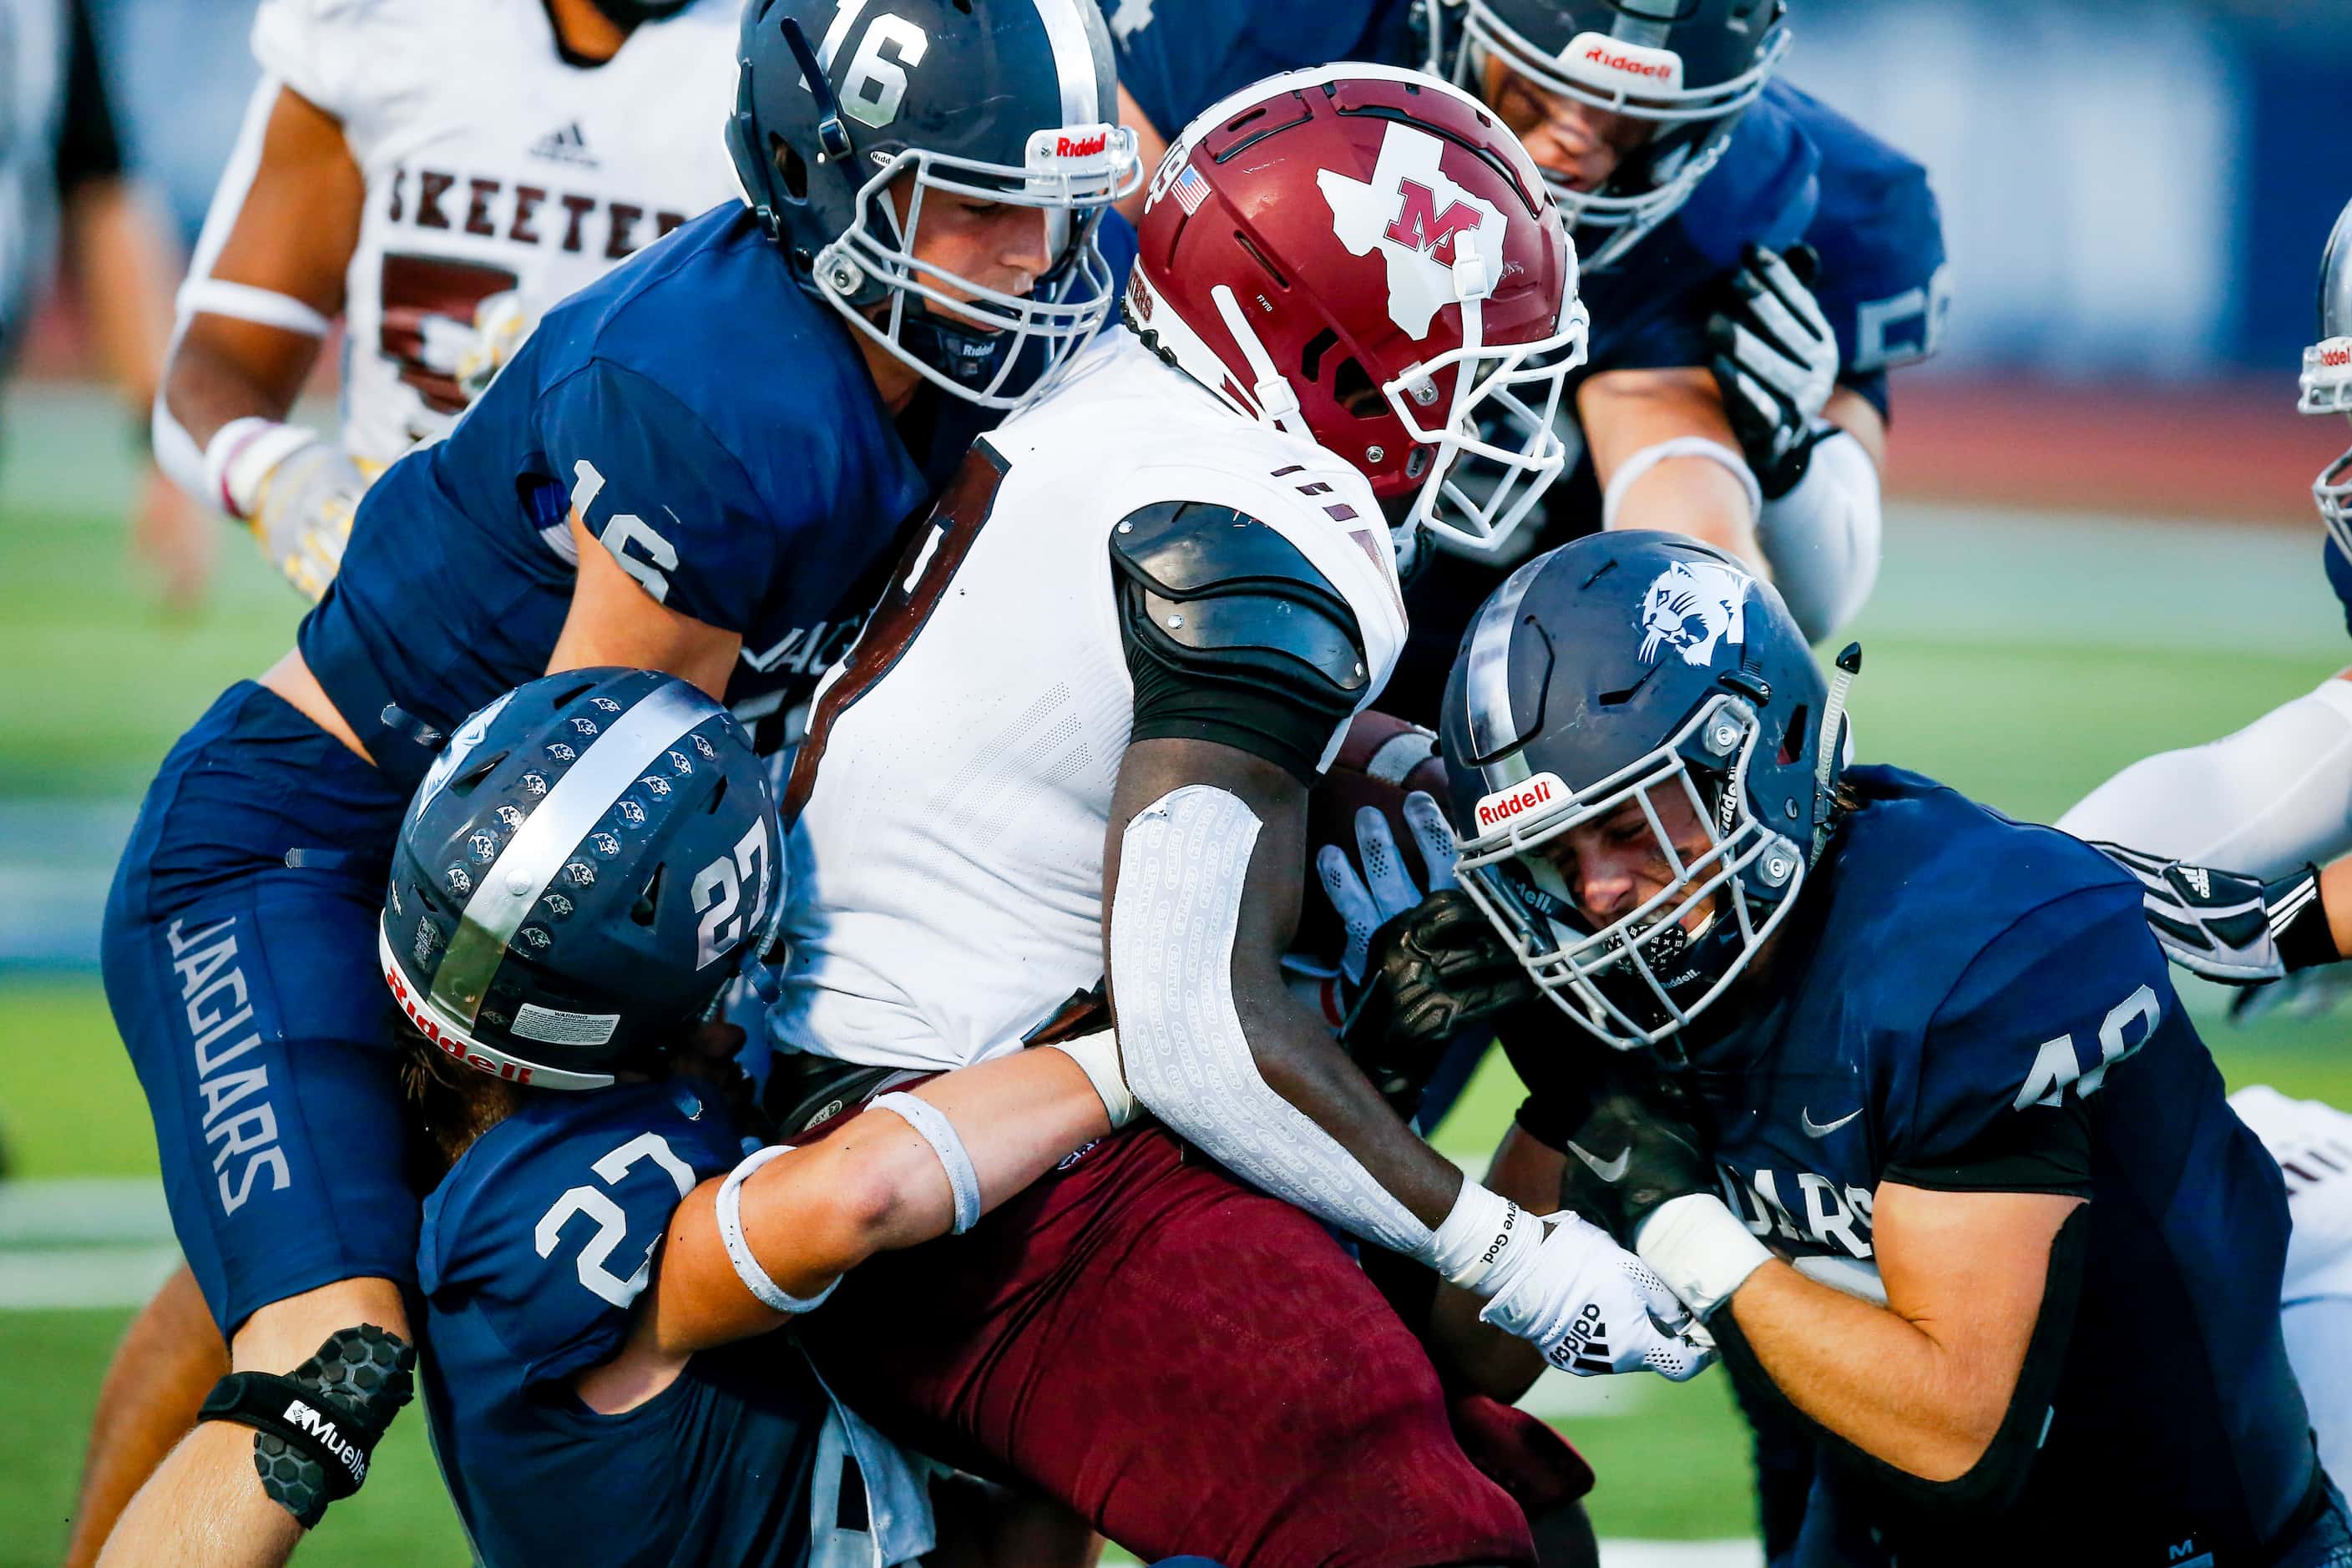 Mesquite senior running back Anthony Roberts (19) is tackled by the Flower Mound defense...